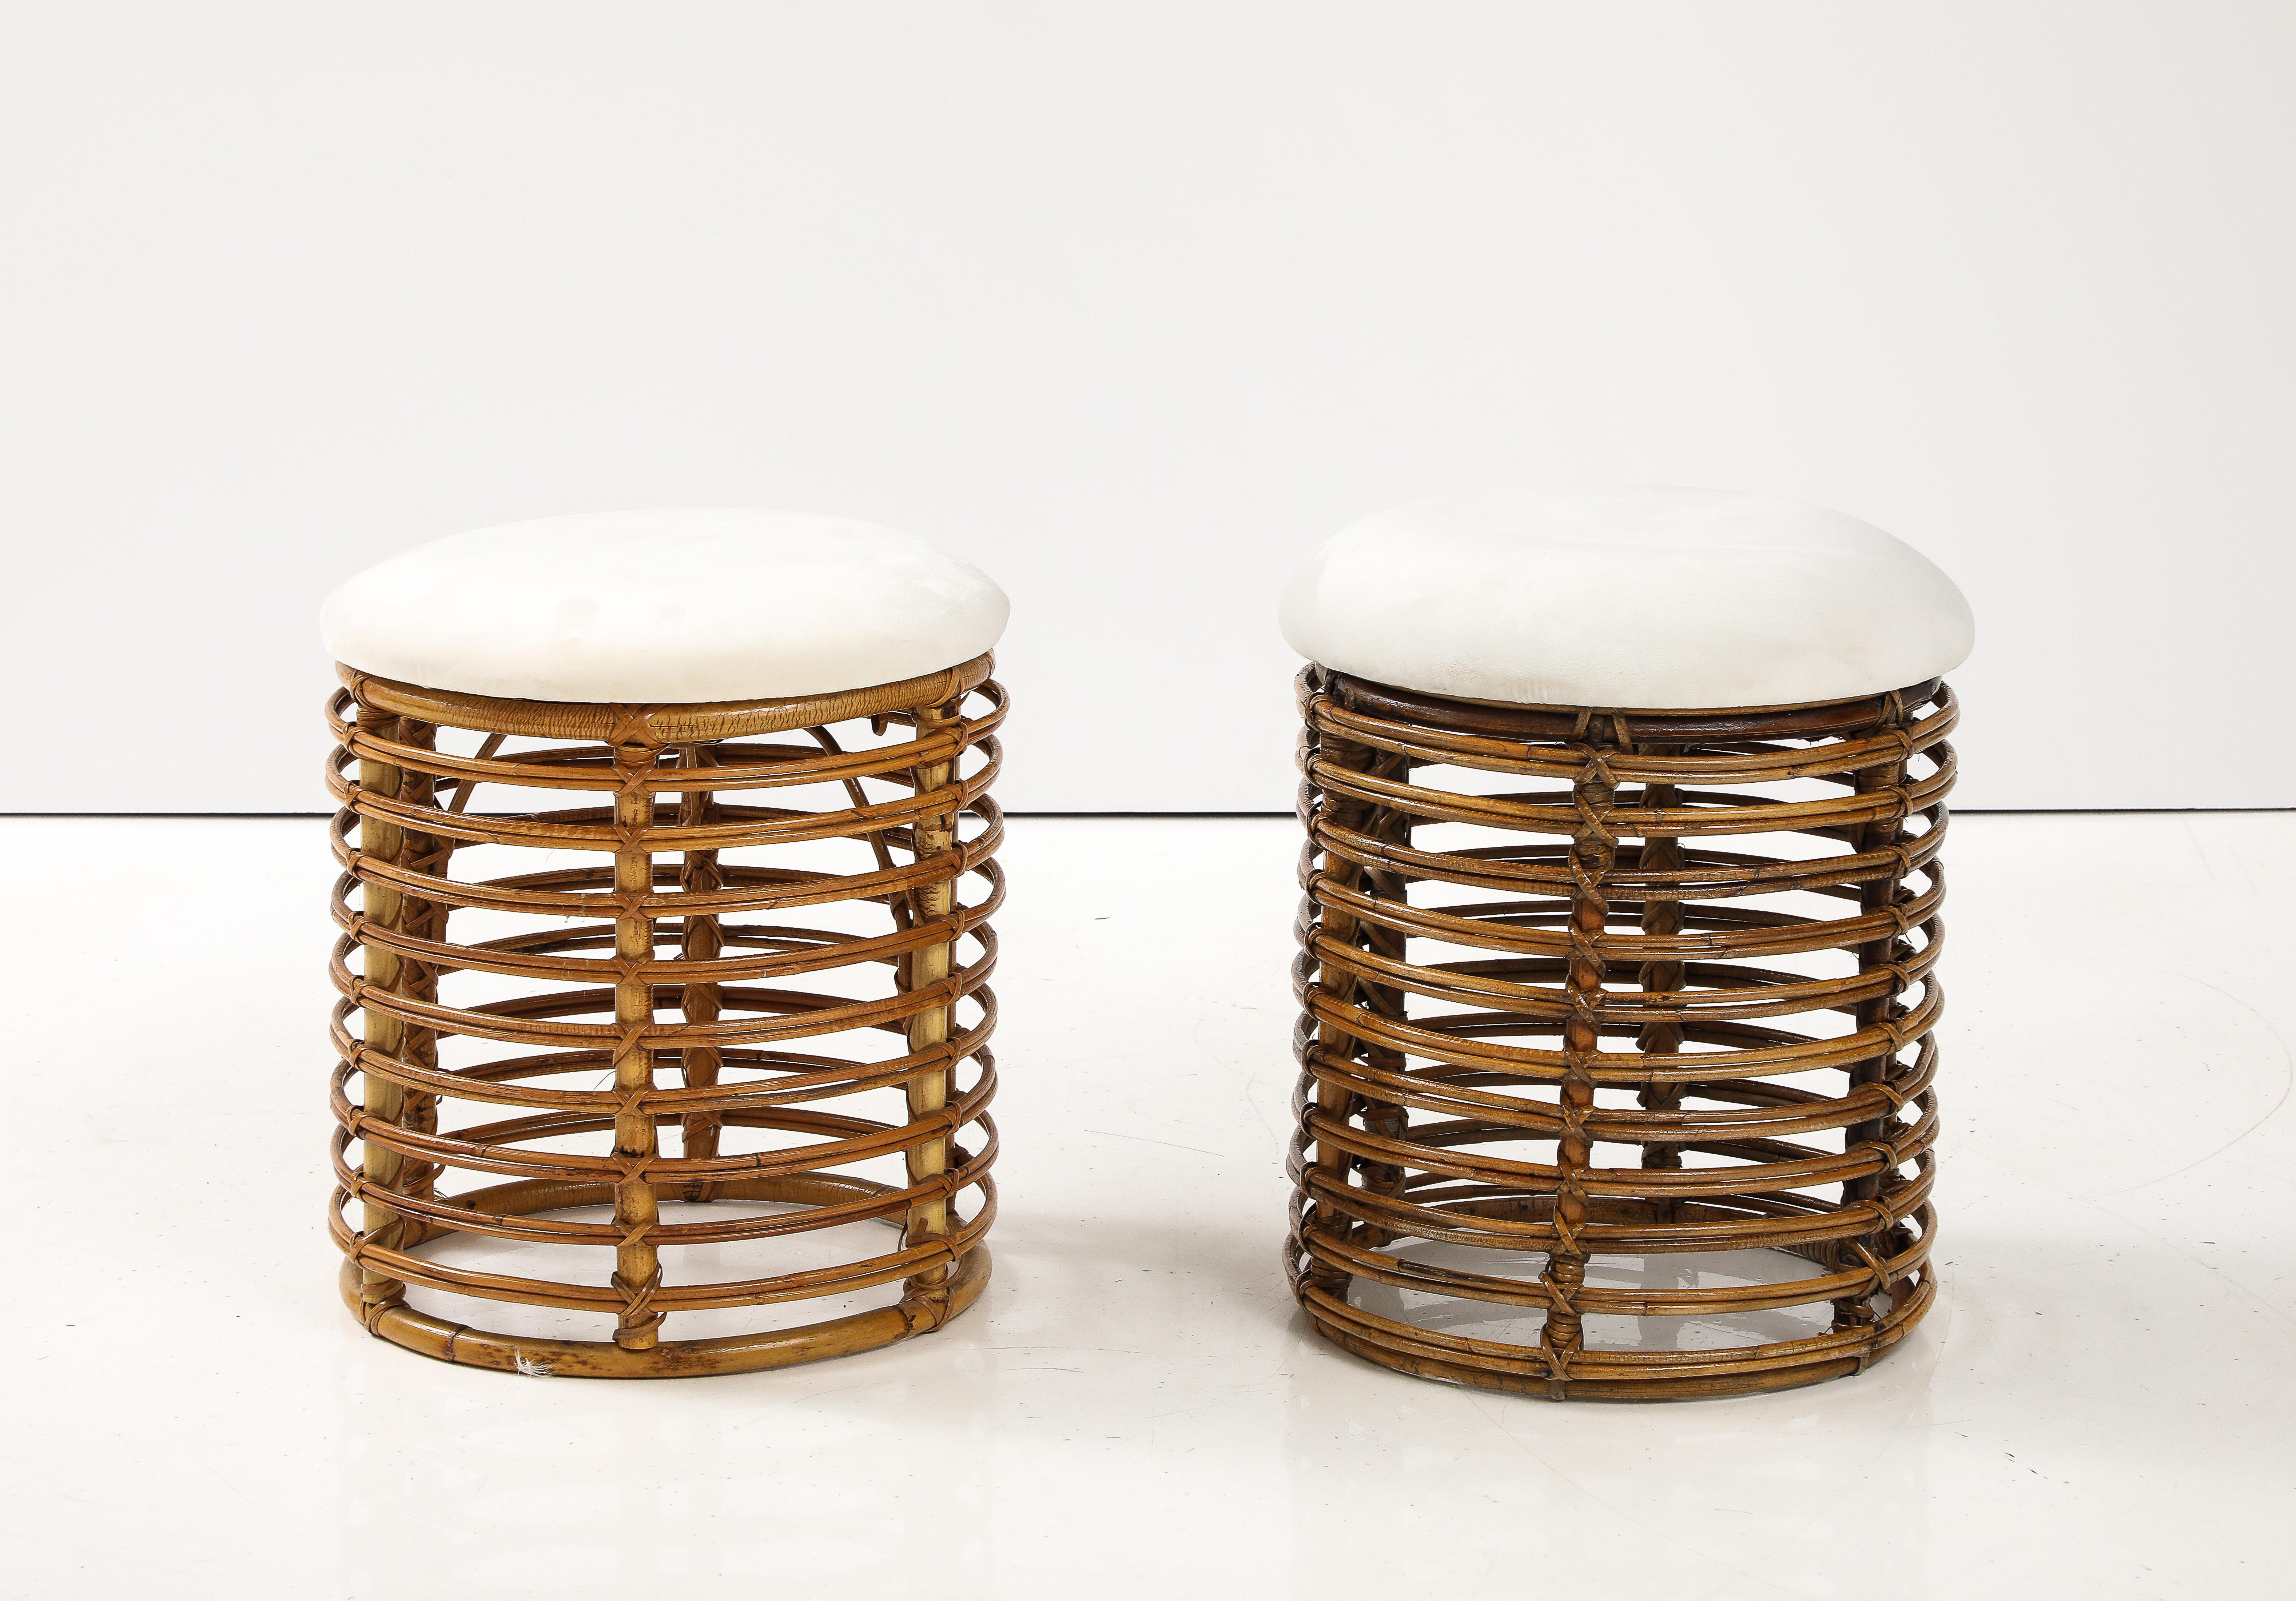 Tito Agnoli Cane Bamboo Stools, Italy, c. 1960 In Good Condition For Sale In Brooklyn, NY